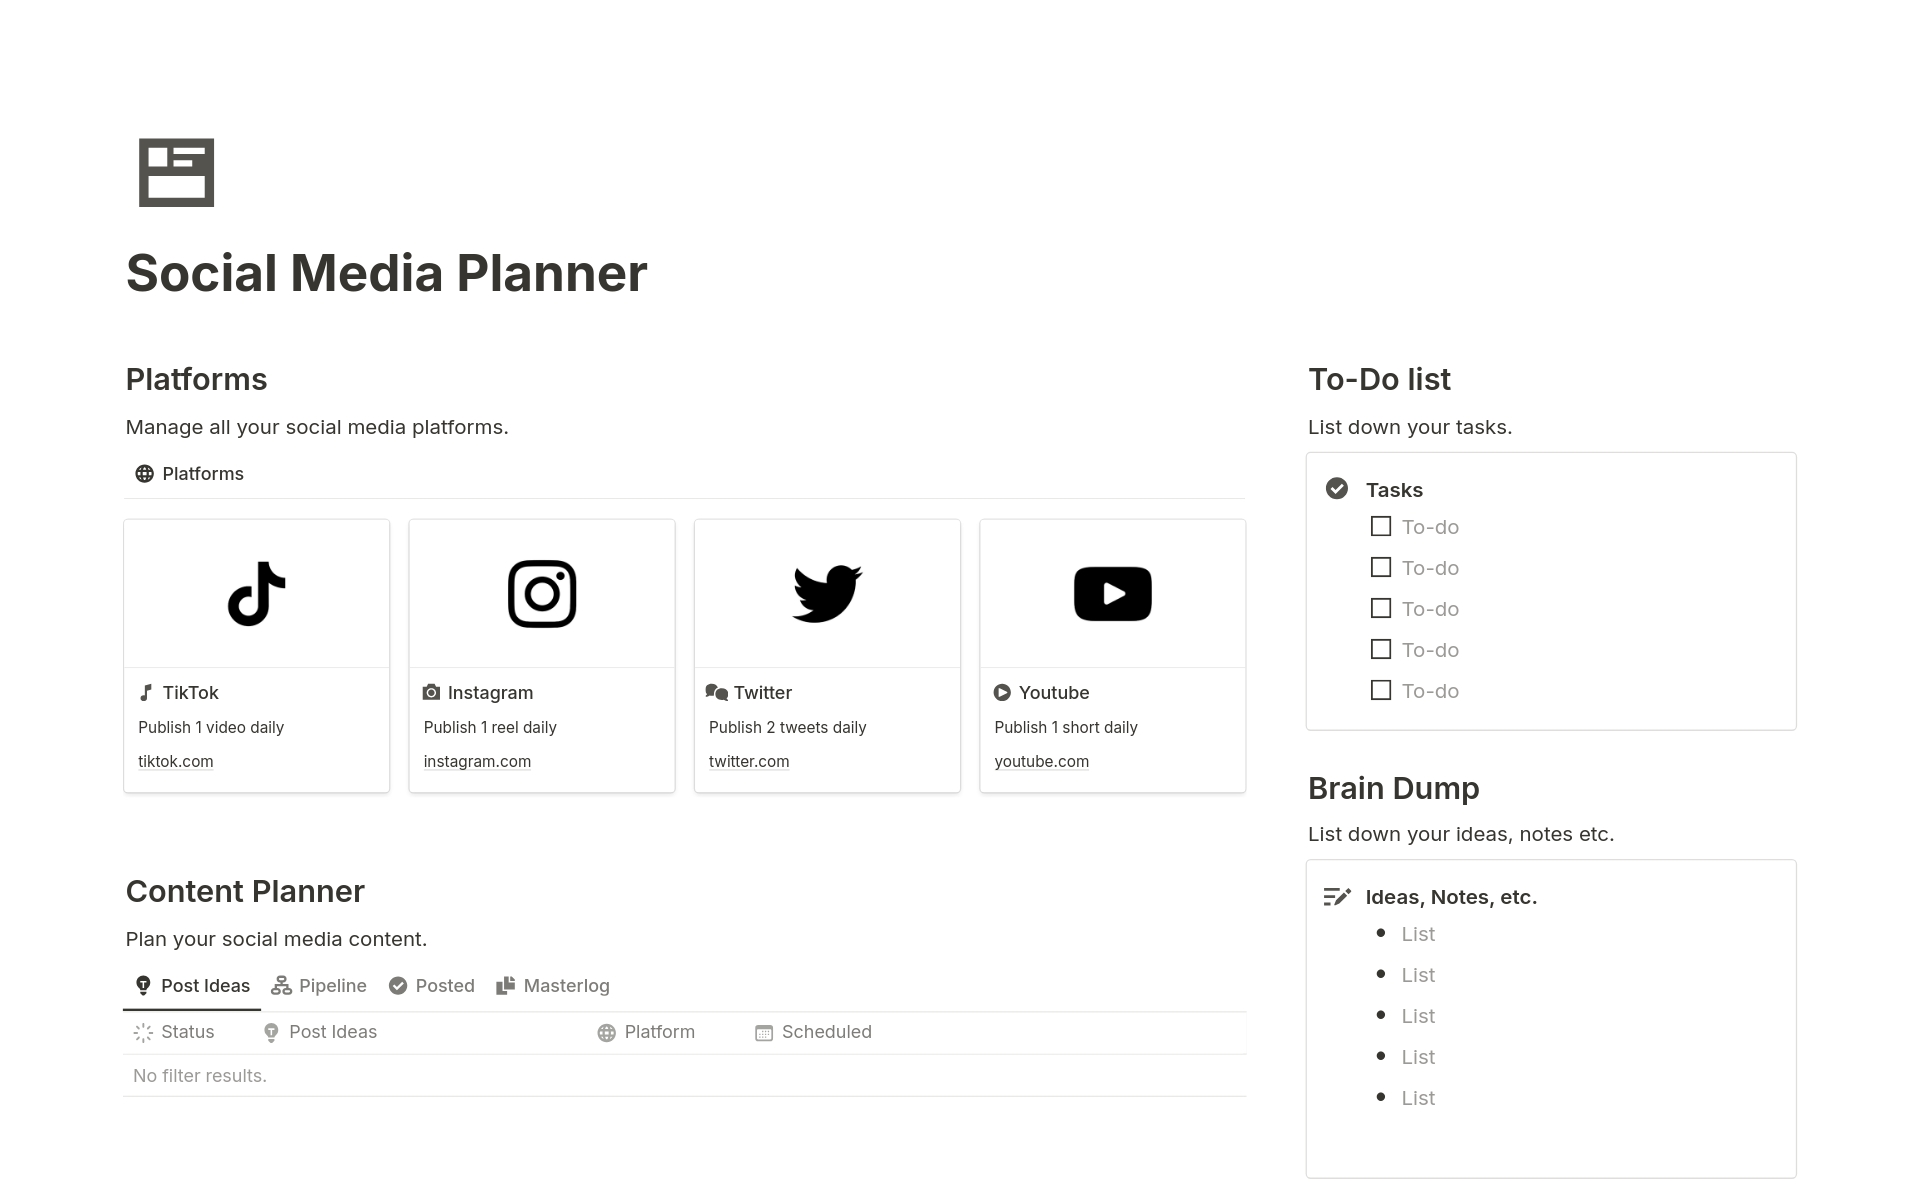 Discover the ultimate Notion-powered Social Media Planner, revolutionizing your online presence with limitless channels, effortless content tracking, streamlined to-do lists, and a dedicated Brain Dump for creative inspiration!